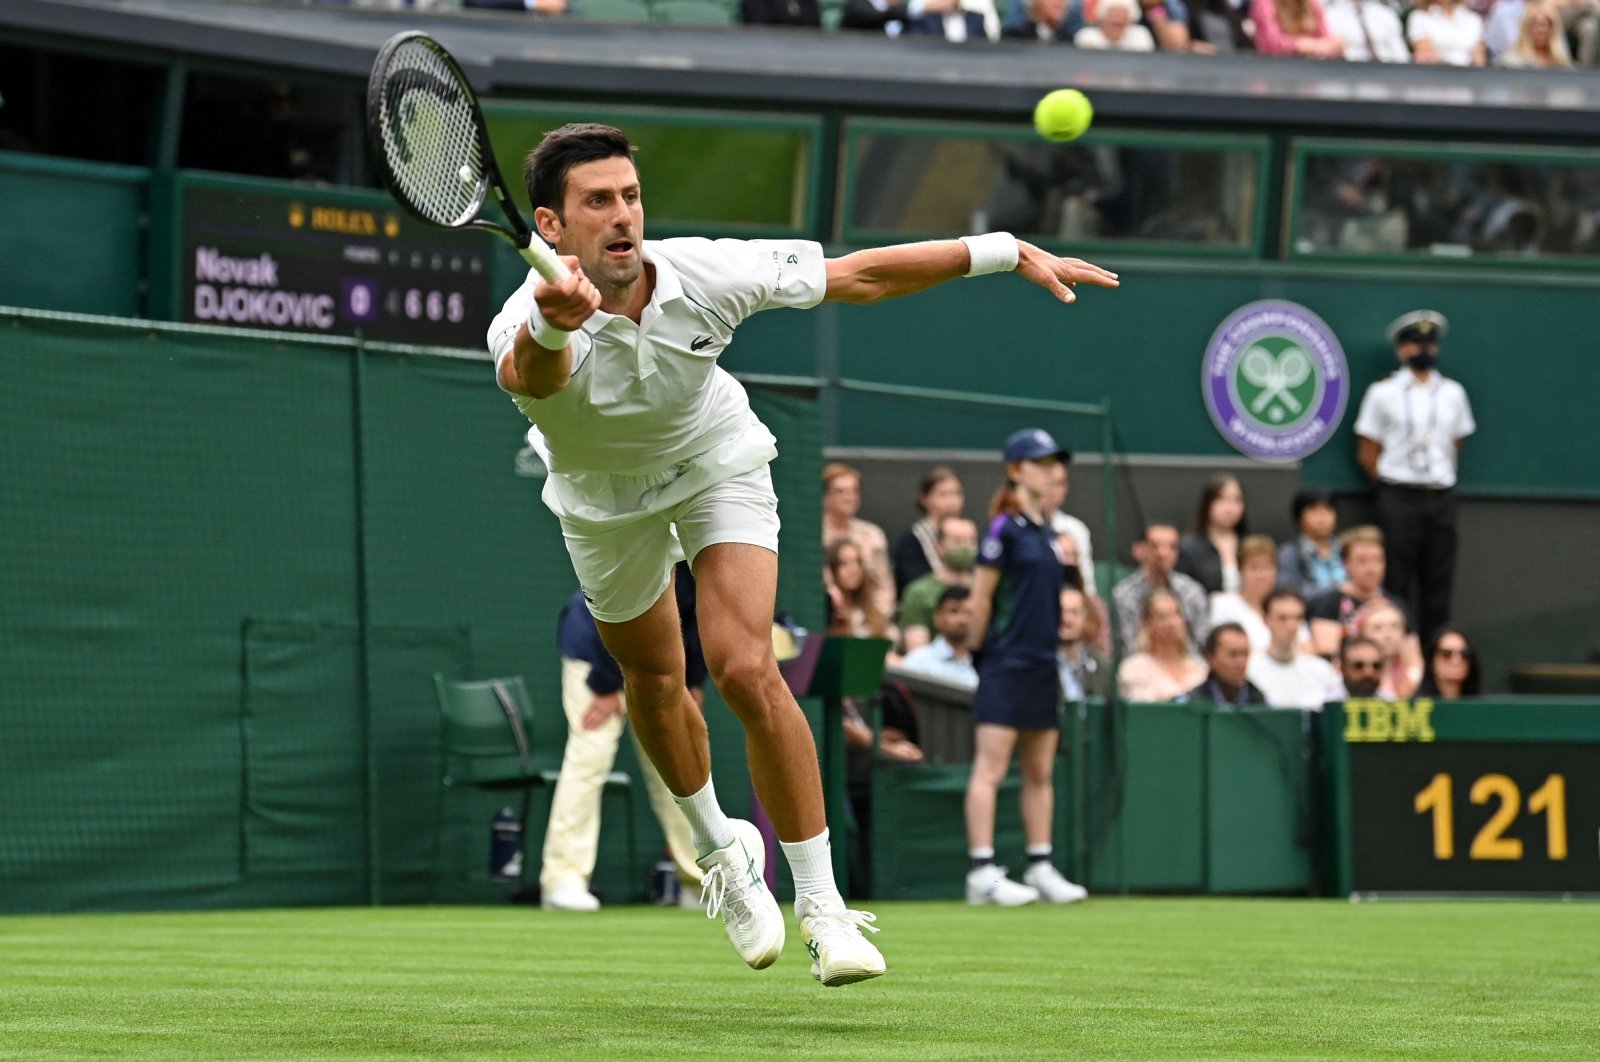 Serbia's Novak Djokovic returns against Britain's Jack Draper during their men's singles first round match at the 2021 Wimbledon at The All England Tennis Club in Wimbledon, southwest London, England, June 28, 2021. (AFP Photo)